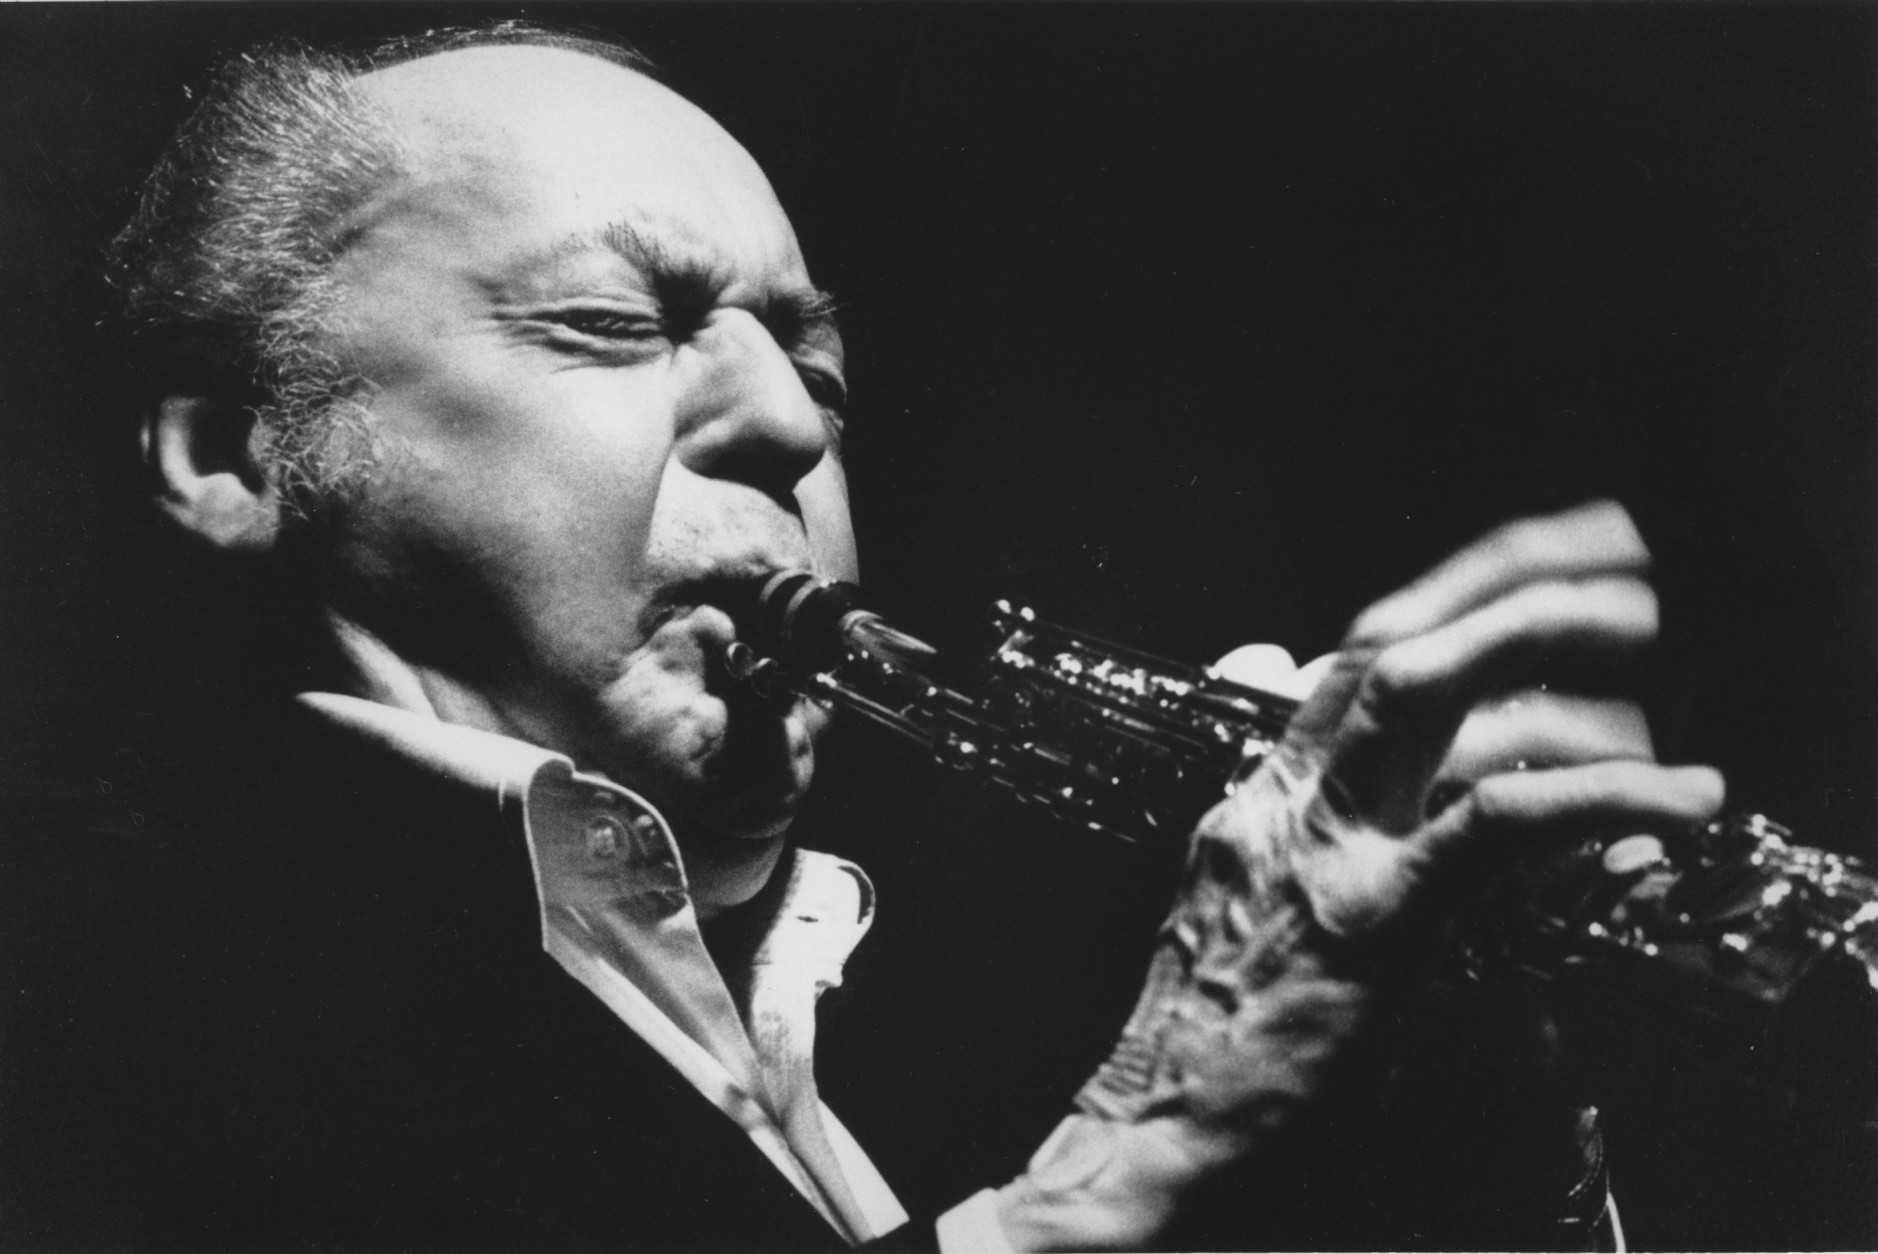 Woody Herman plays the clarinet on his 71st birthday at the Radisson Hotel in Wilmington, Del., Wed., May 16, 1984. Herman led his group "The Young Thundering Herd" in a birthday celebration that also marked his induction into the Big Band Hall of Fame. (AP Photo)